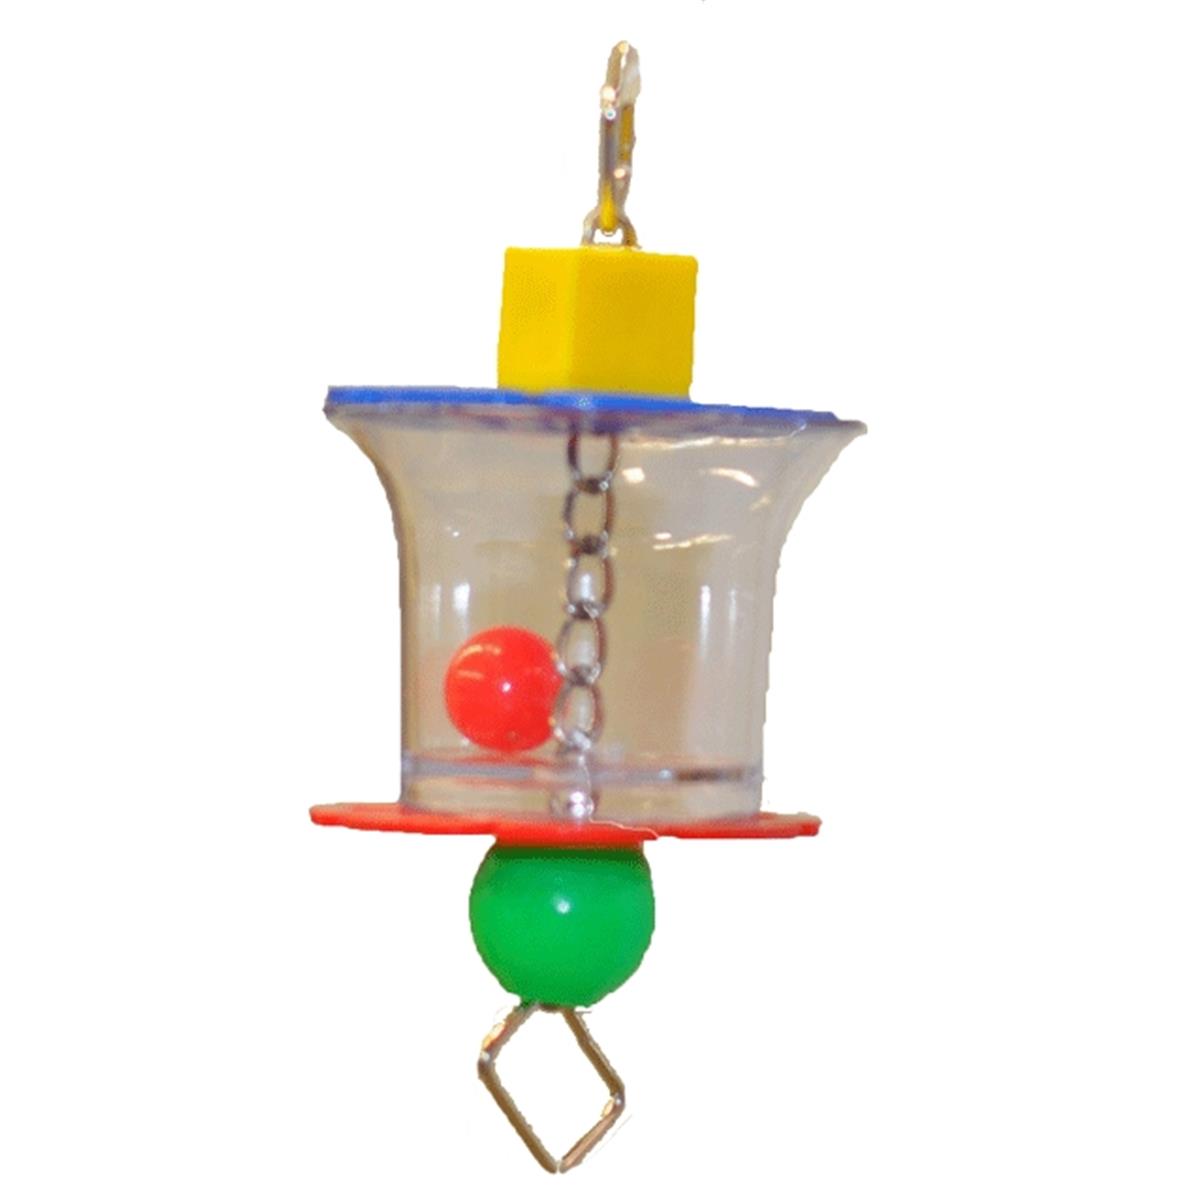 Hb832 Cheers Bird Toy - Small